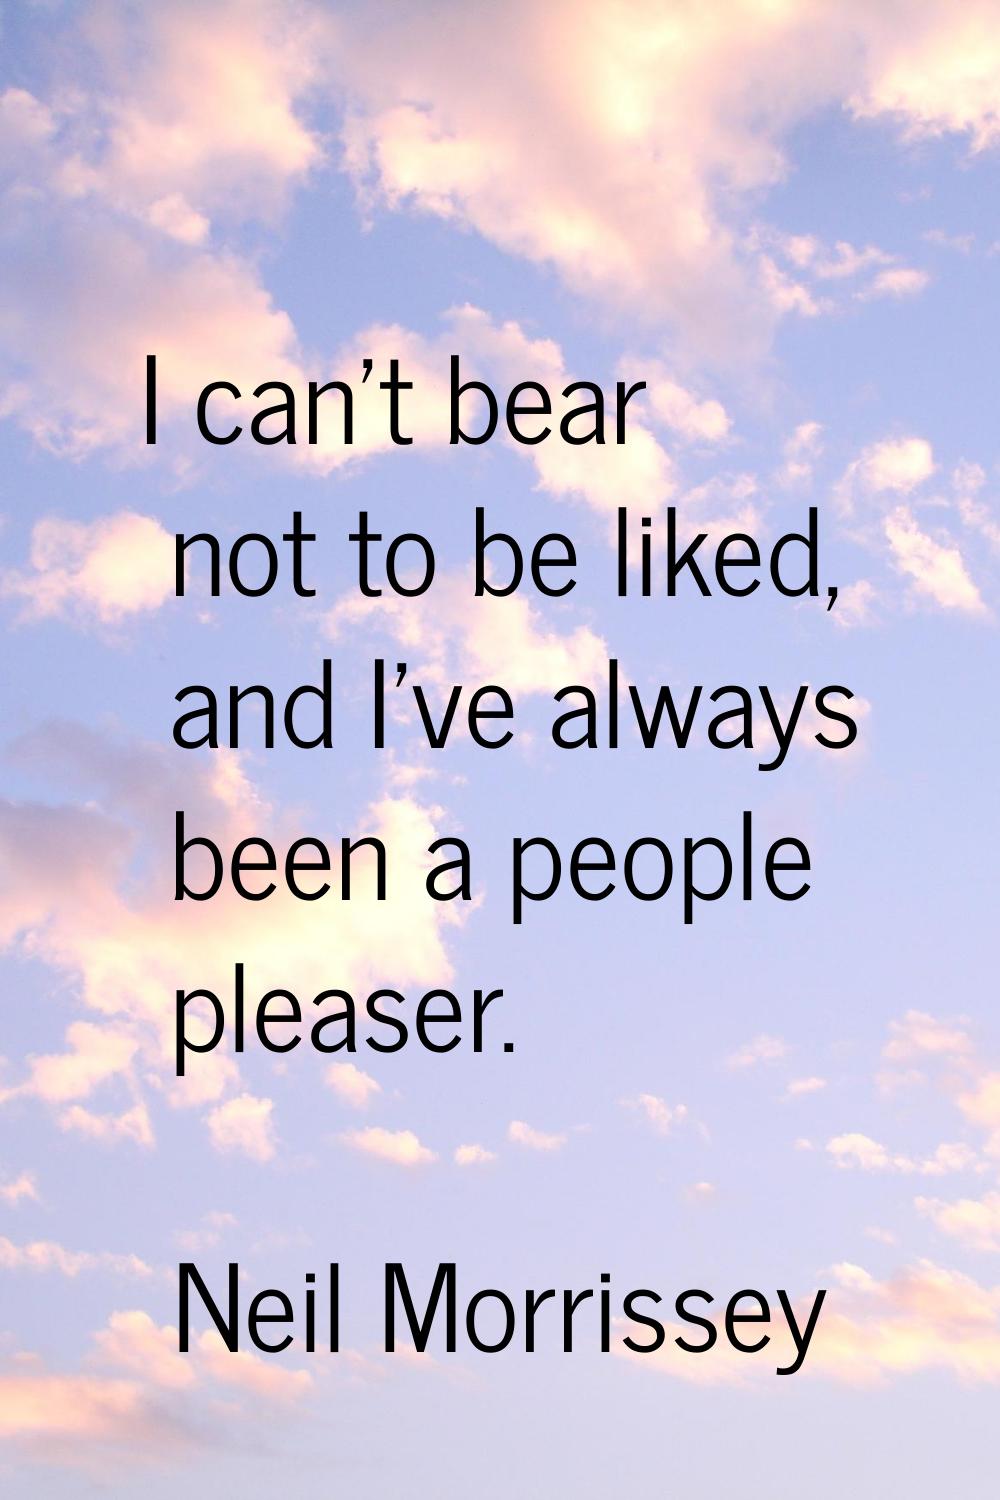 I can't bear not to be liked, and I've always been a people pleaser.